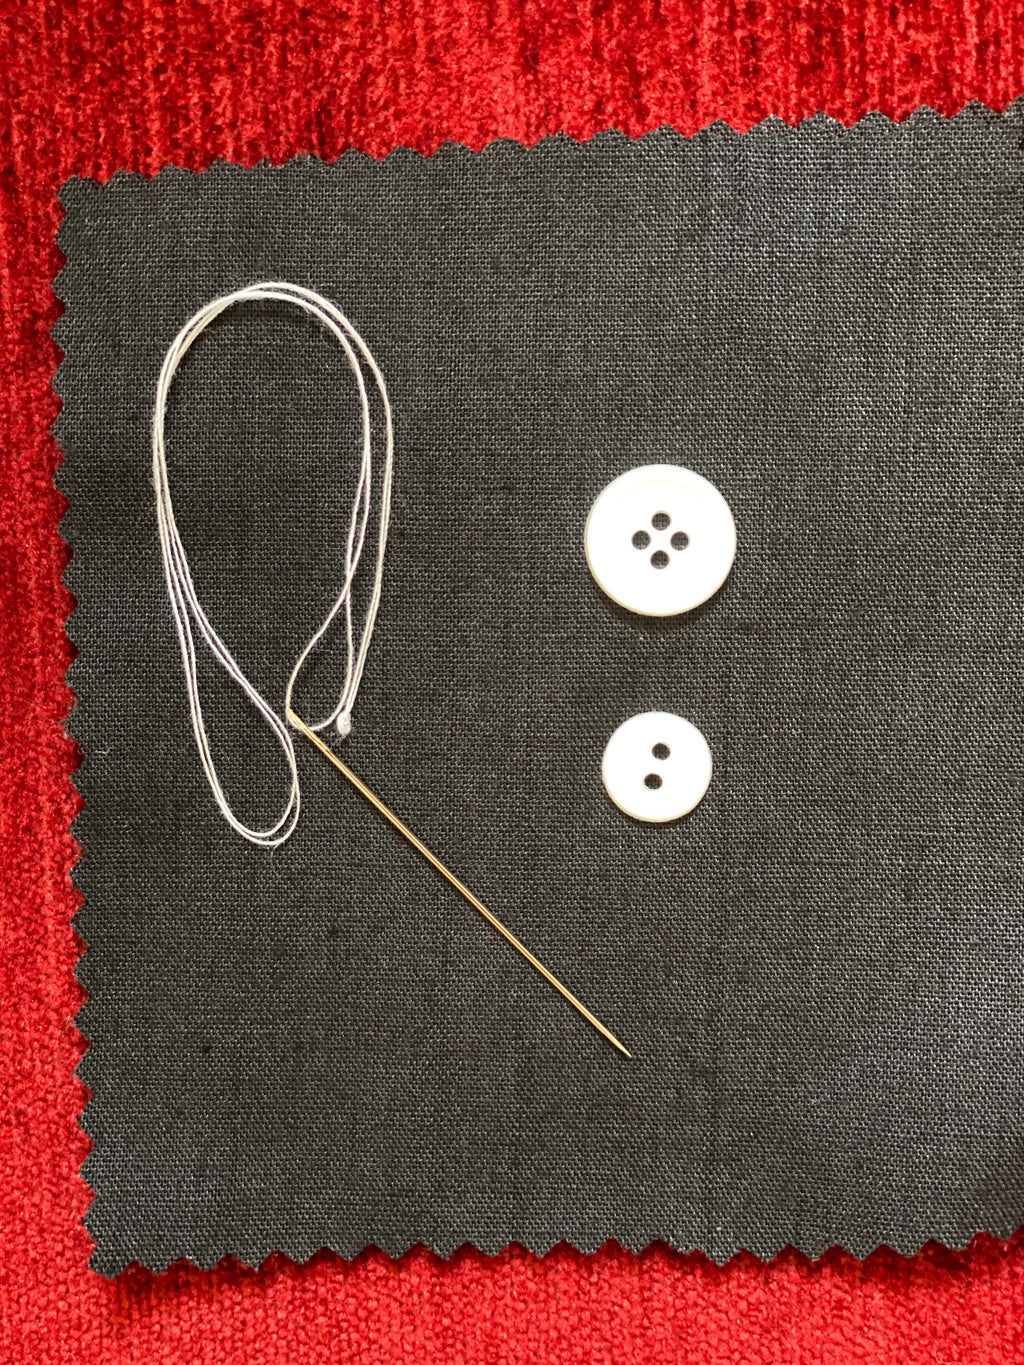 LEARN TO SEW ON A BUTTON